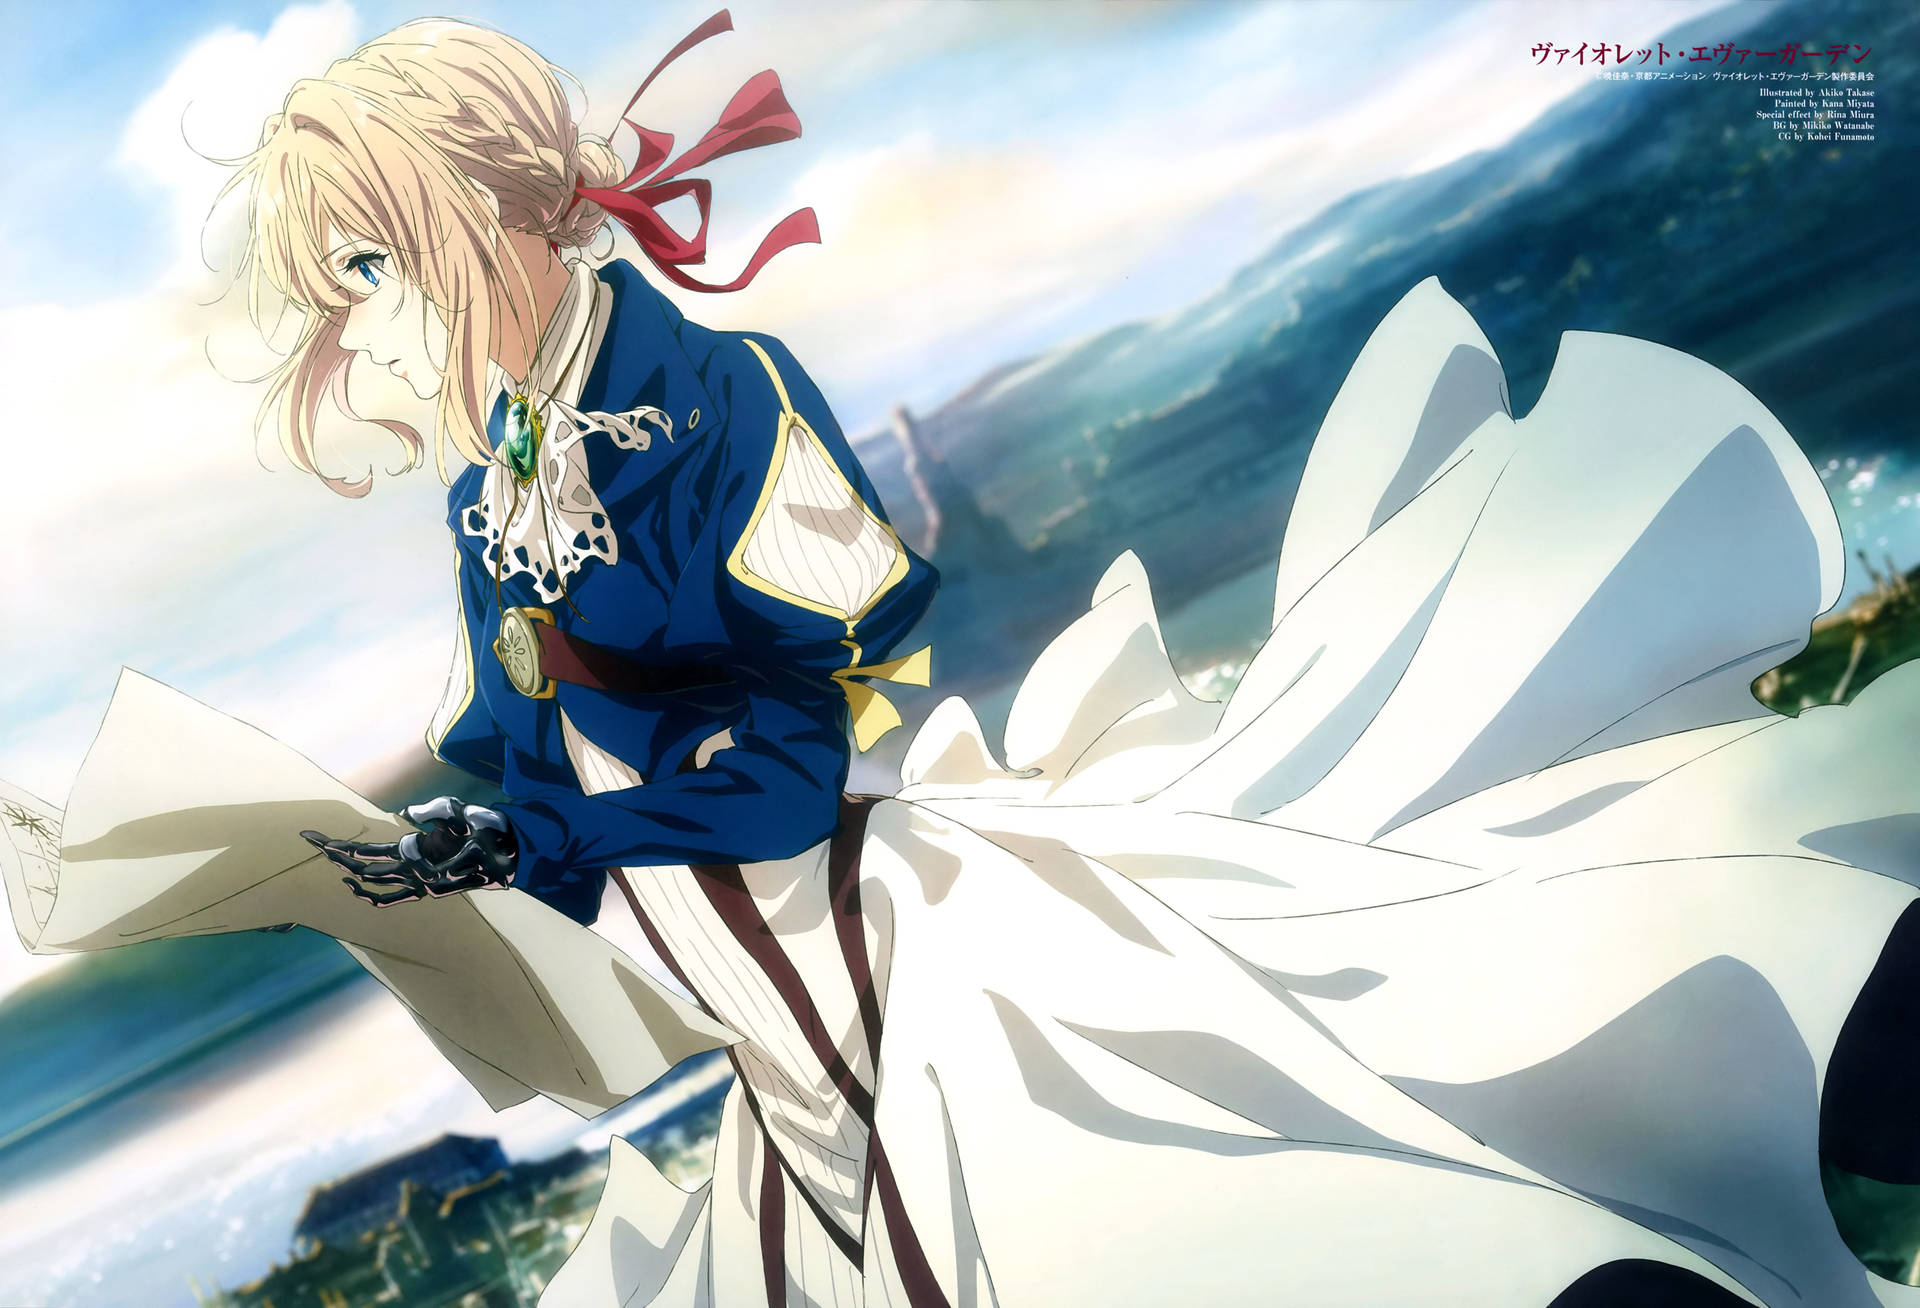 Top 999+ Violet Evergarden Wallpapers Full HD, 4K✅Free to Use